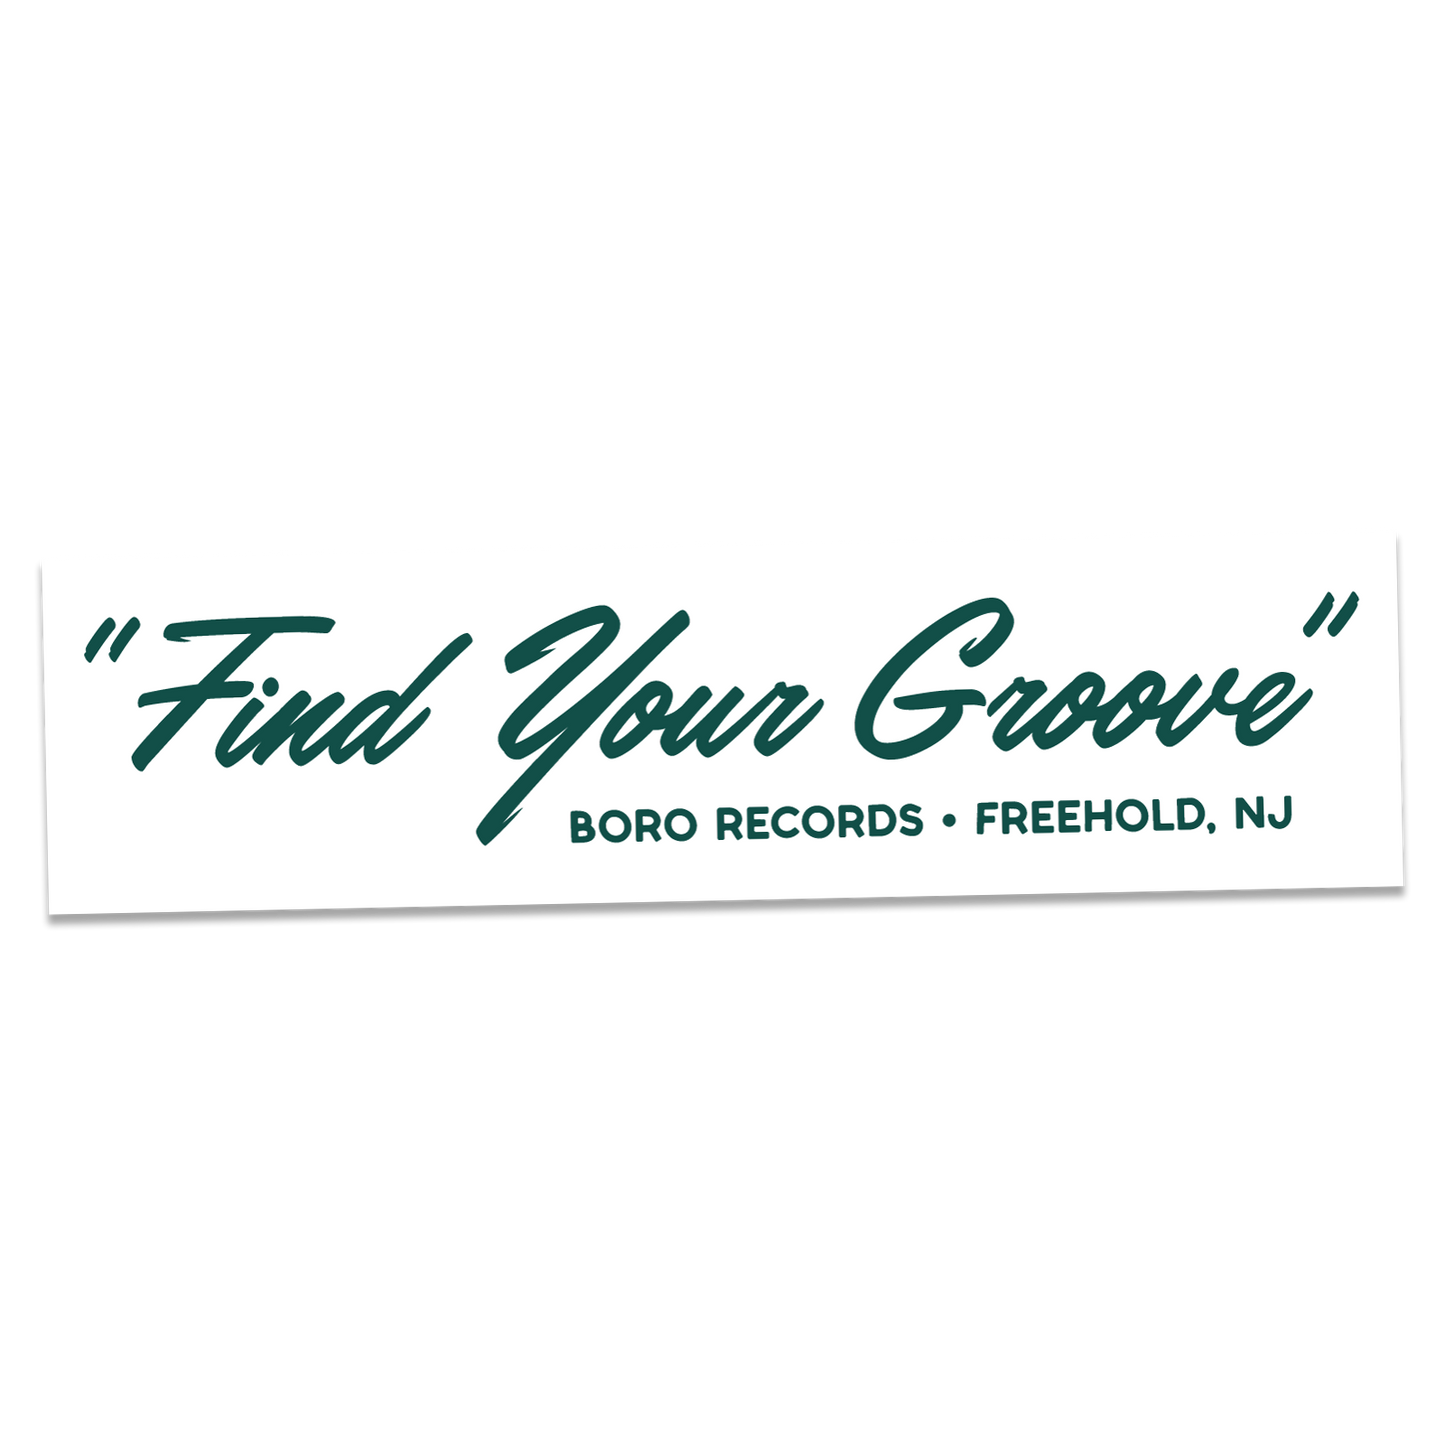 "Find Your Groove" Bumper Sticker